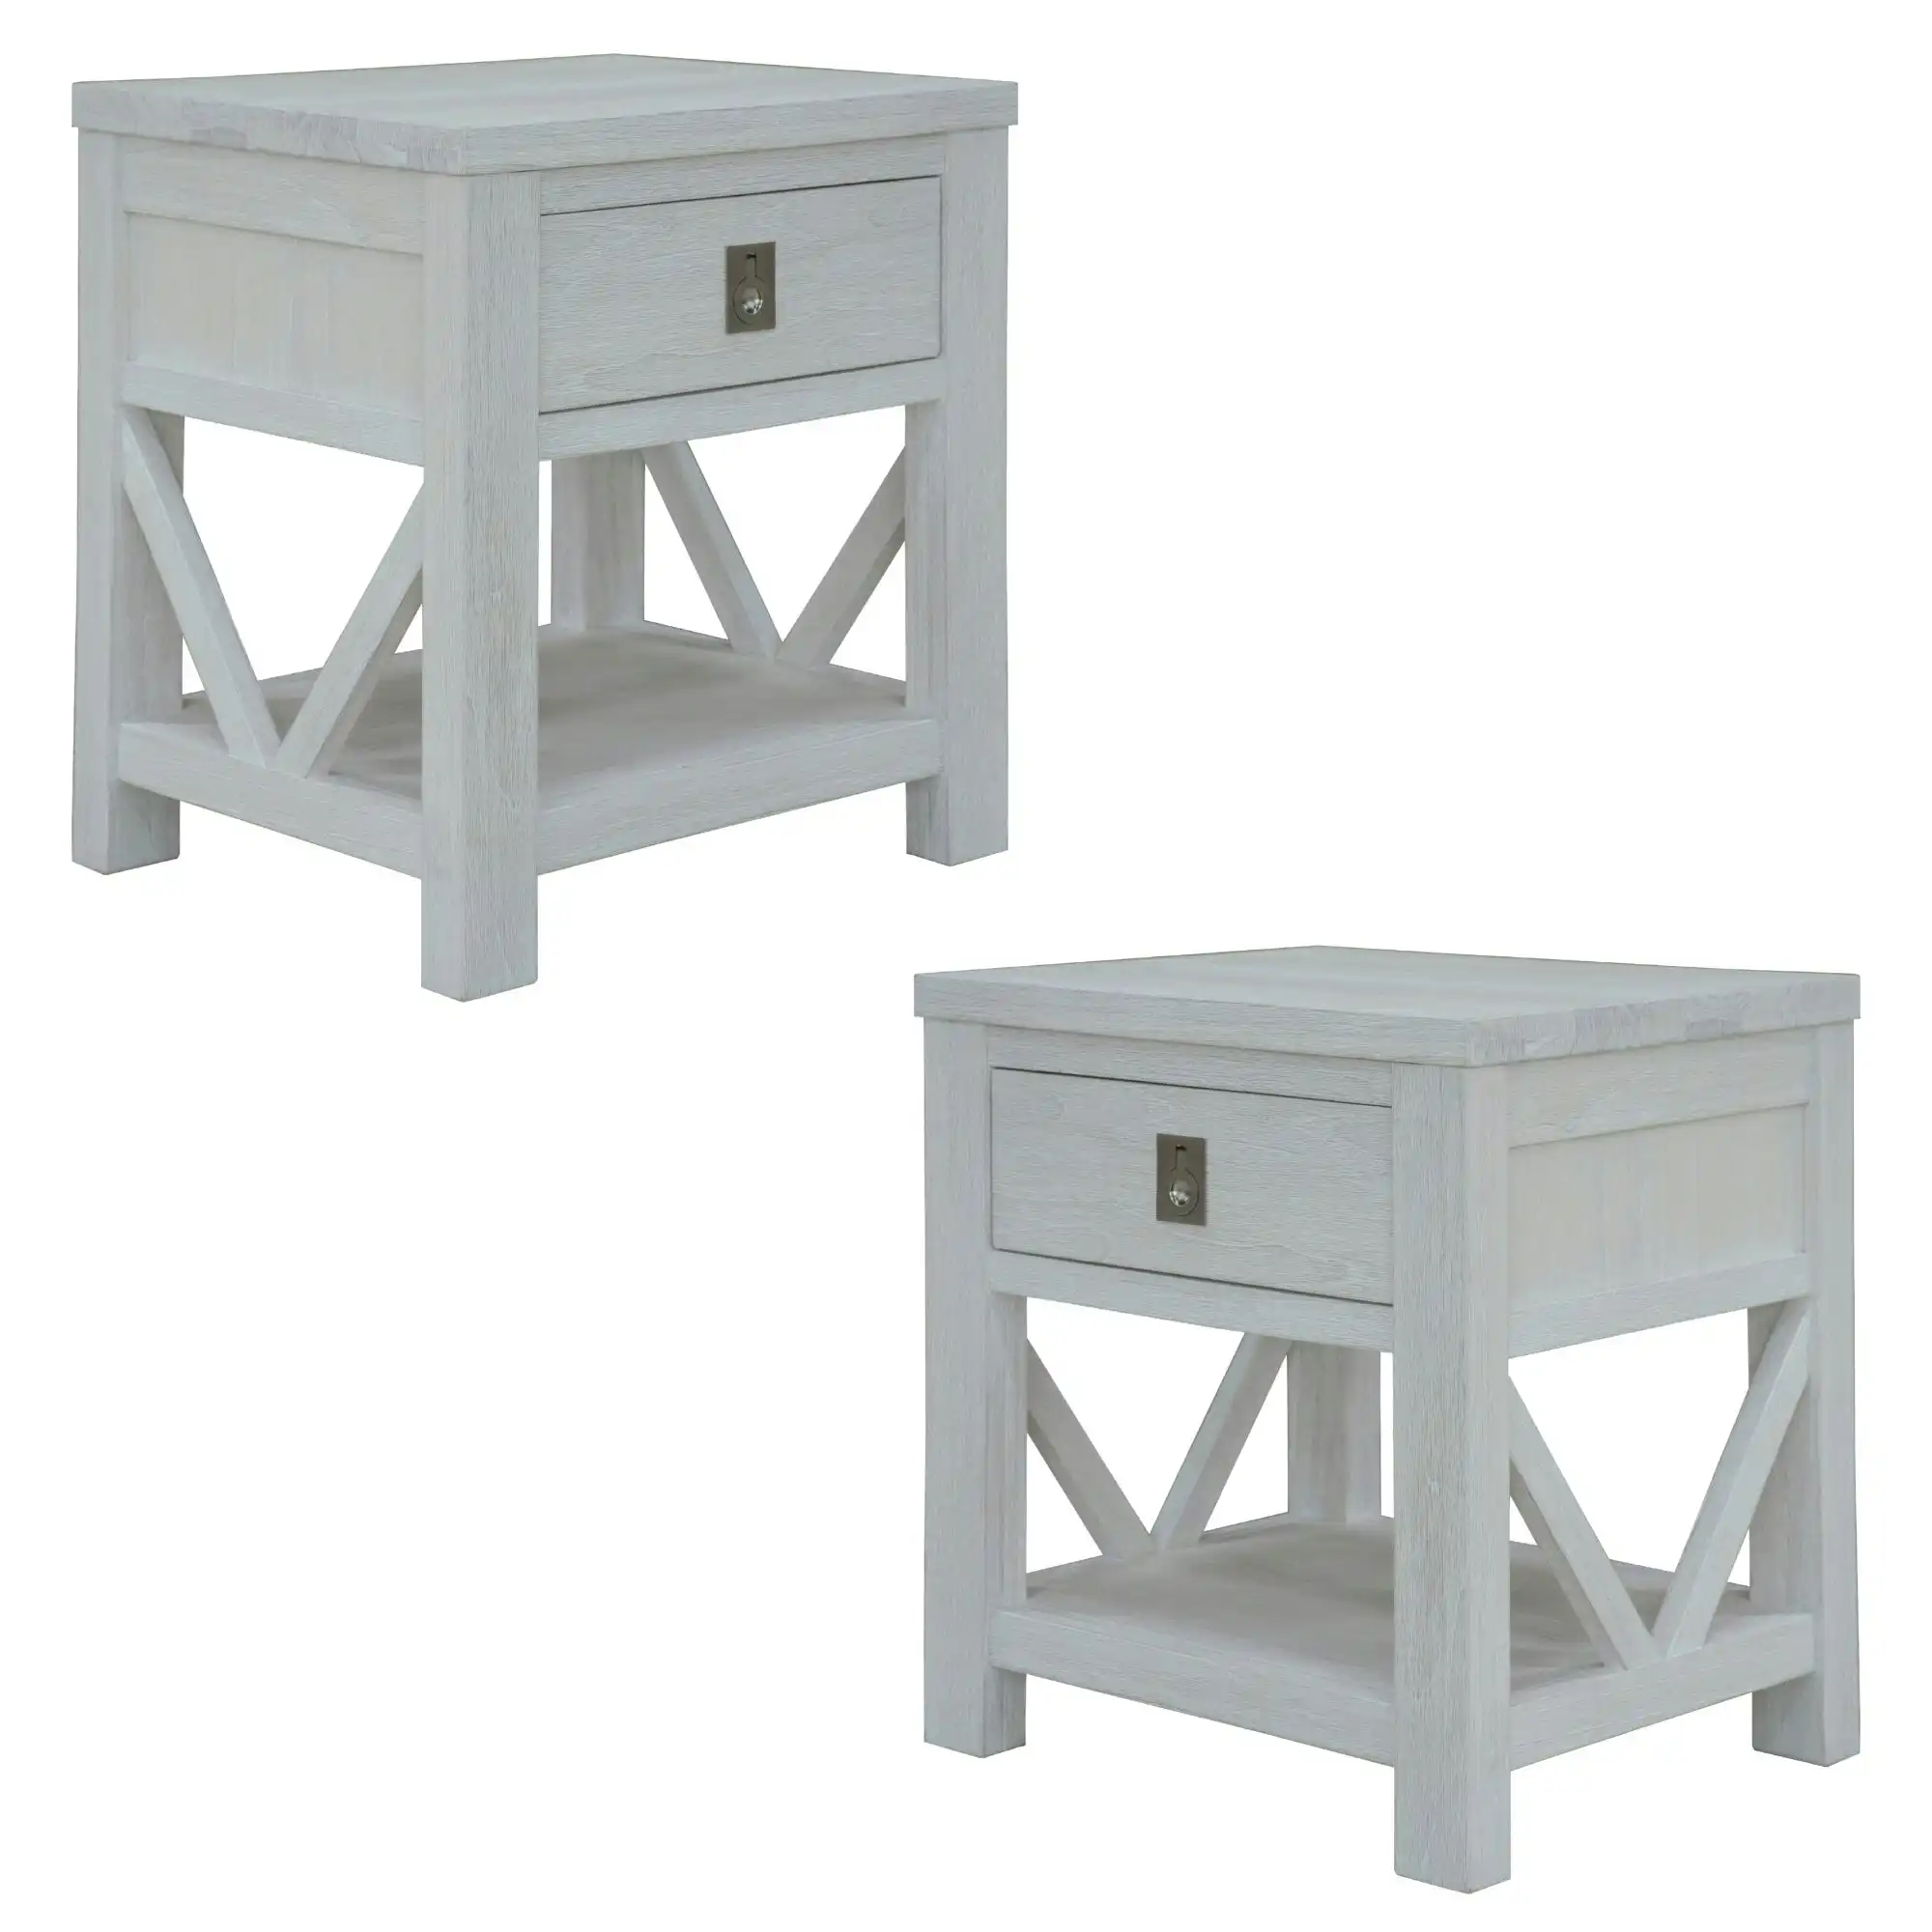 Myer 2pc Bedside Table White Wash